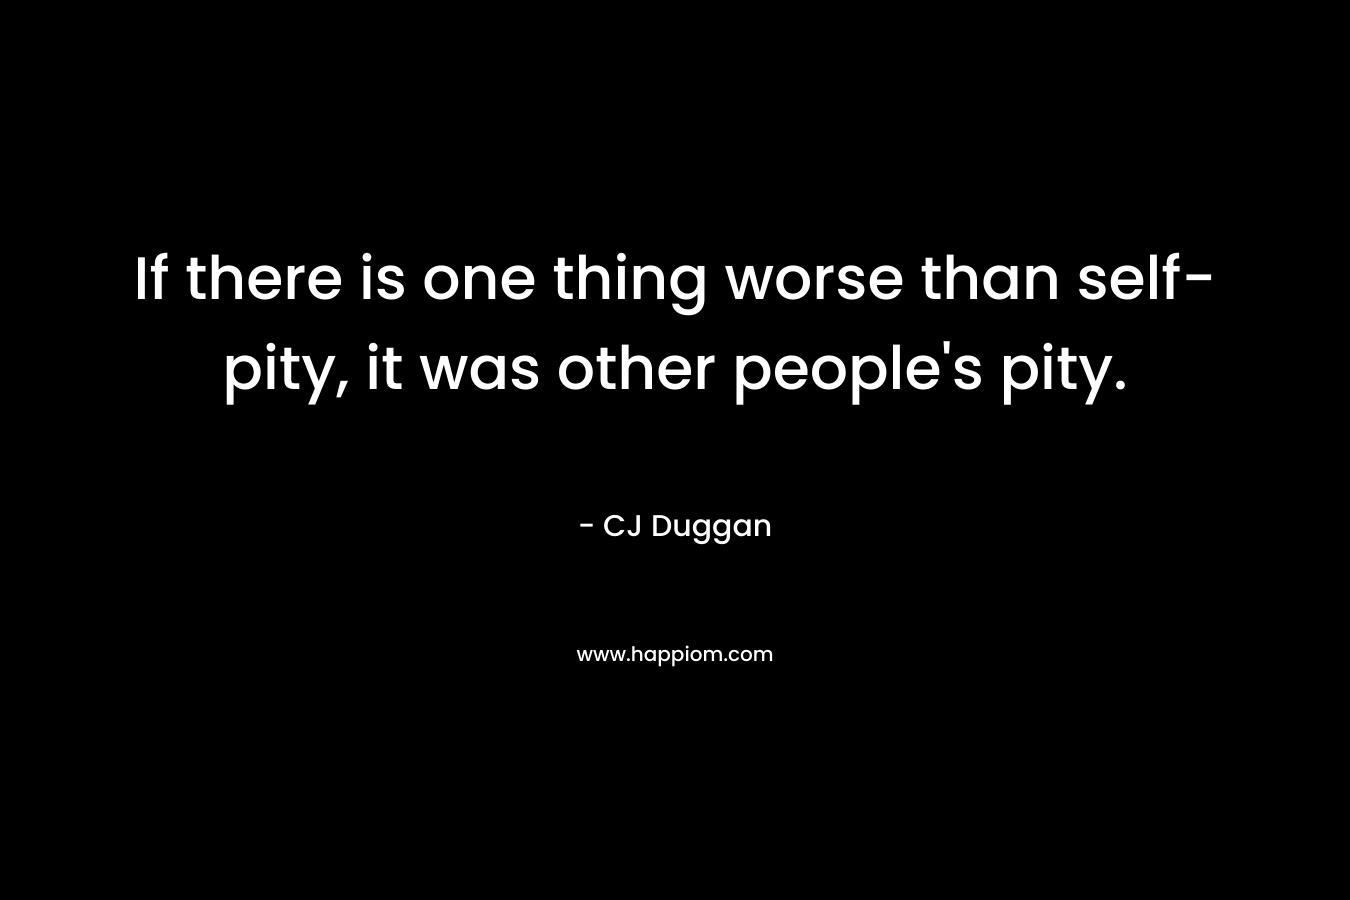 If there is one thing worse than self-pity, it was other people’s pity. – CJ Duggan